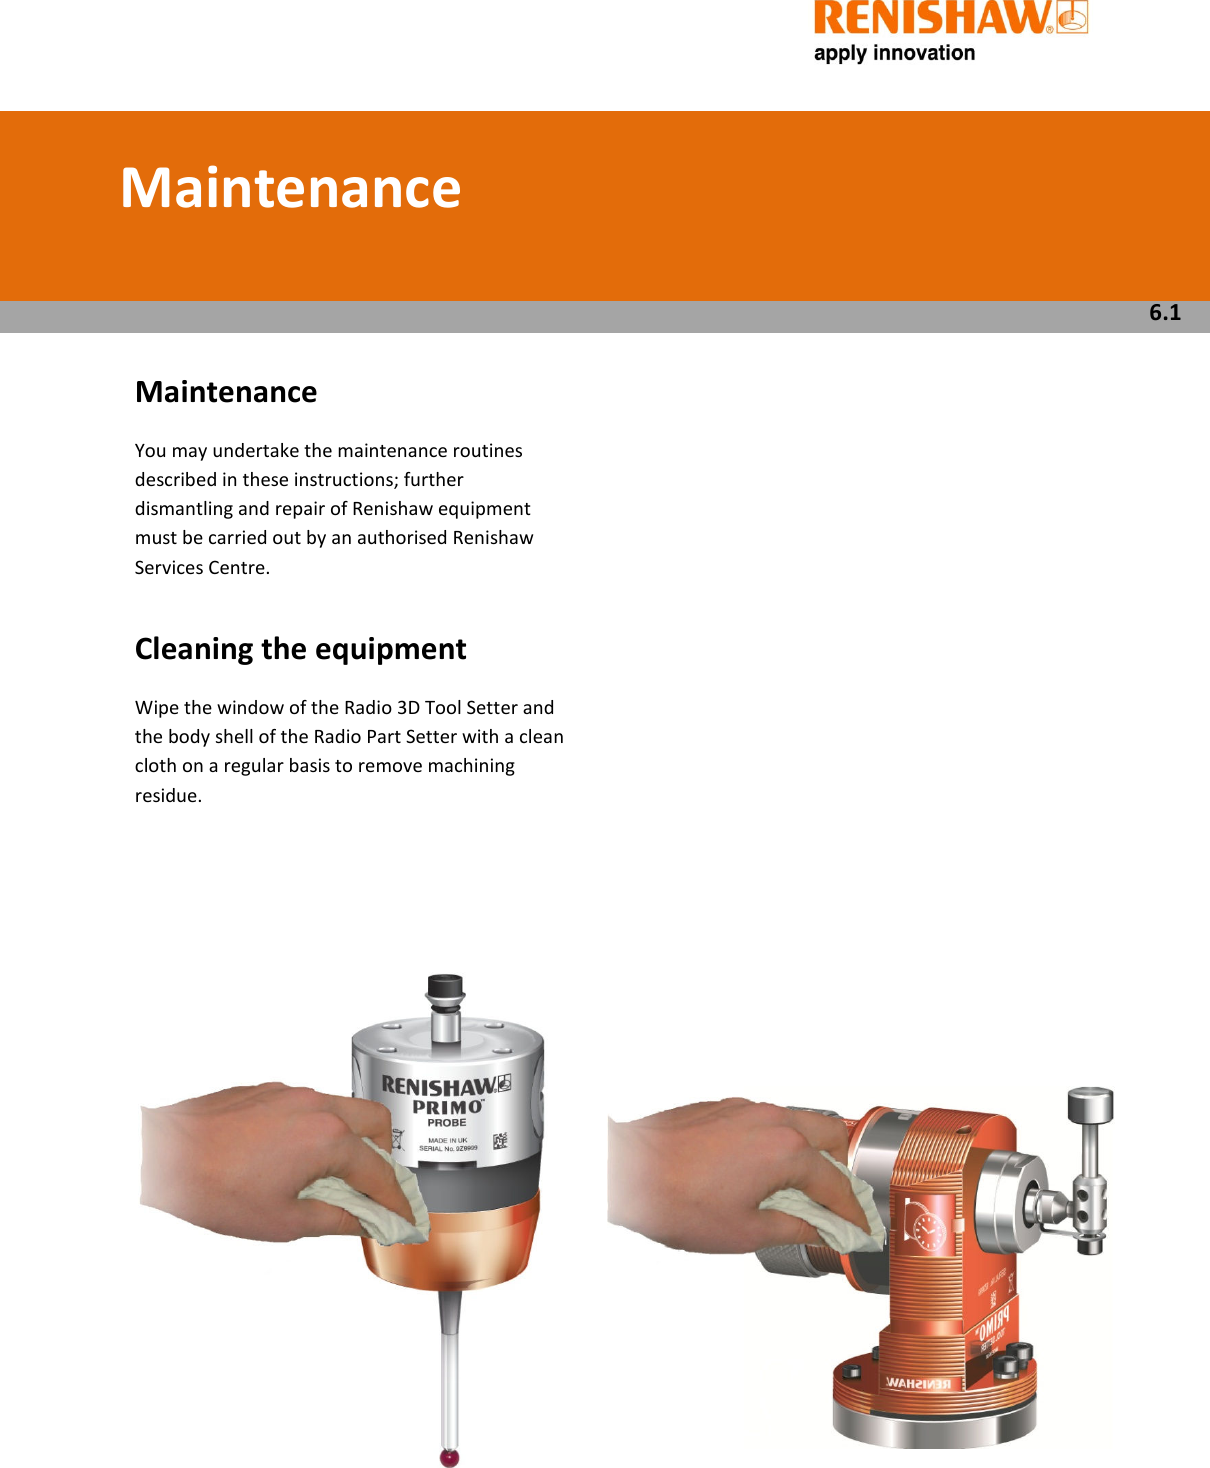          Maintenance   You may undertake the maintenance routines described in these instructions; further dismantling and repair of Renishaw equipment must be carried out by an authorised Renishaw Services Centre.  Cleaning the equipment  Wipe the window of the Radio 3D Tool Setter and the body shell of the Radio Part Setter with a clean cloth on a regular basis to remove machining residue.                               Maintenance   6.1 